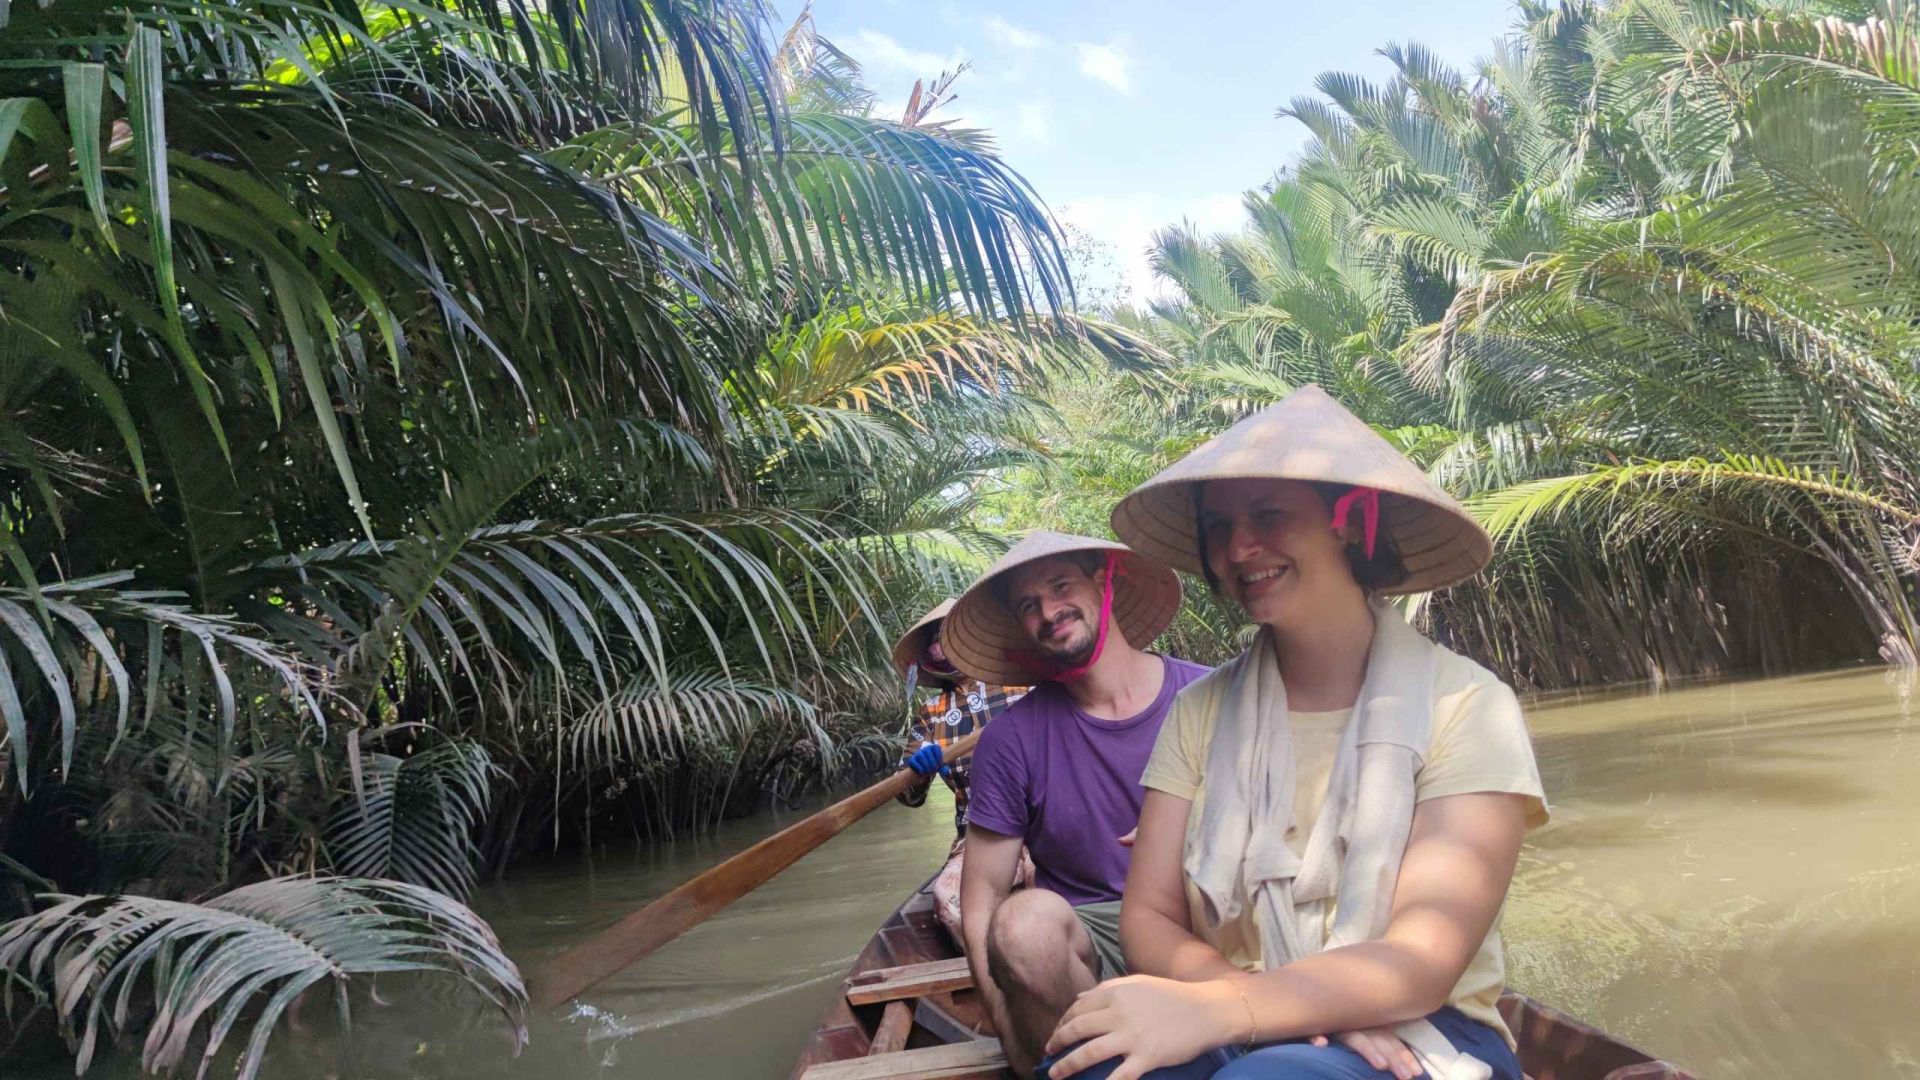 Mekong Delta 3 Days Tour Review - Mekong Culture Immersion